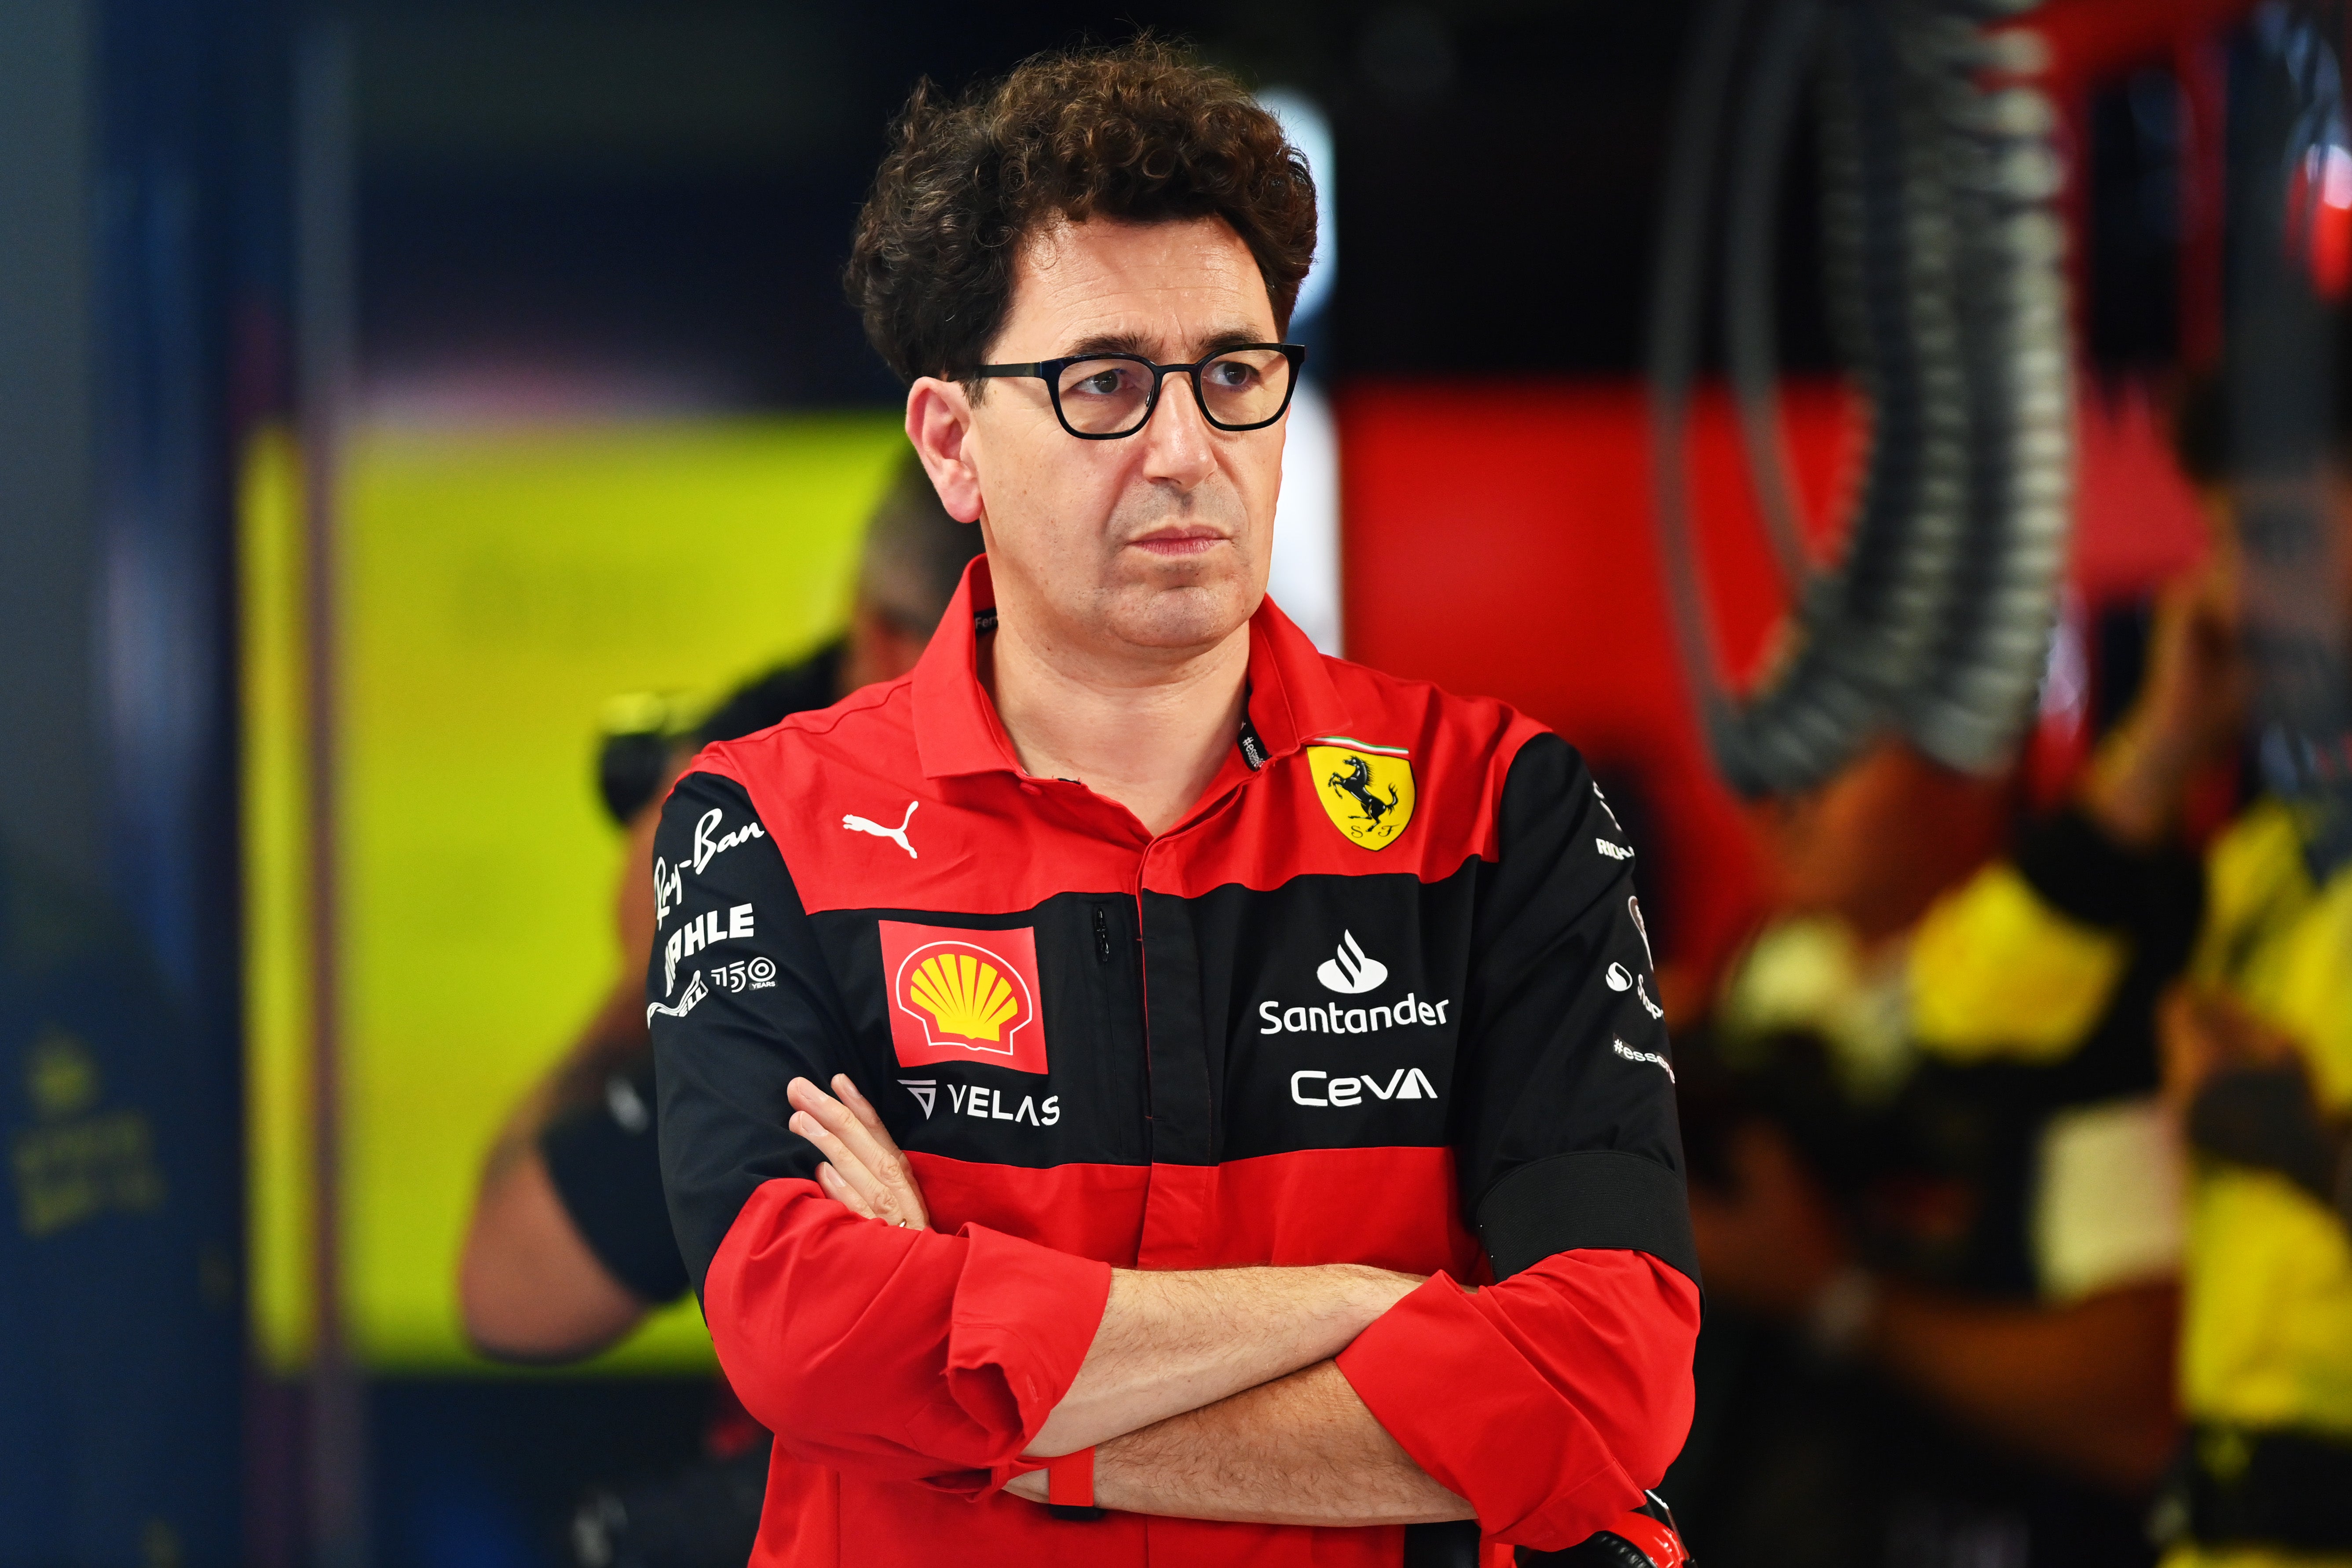 Mattia Binotto dismissed suggestions that the new technical directive has impacted Ferrari ’s performance since the summer break